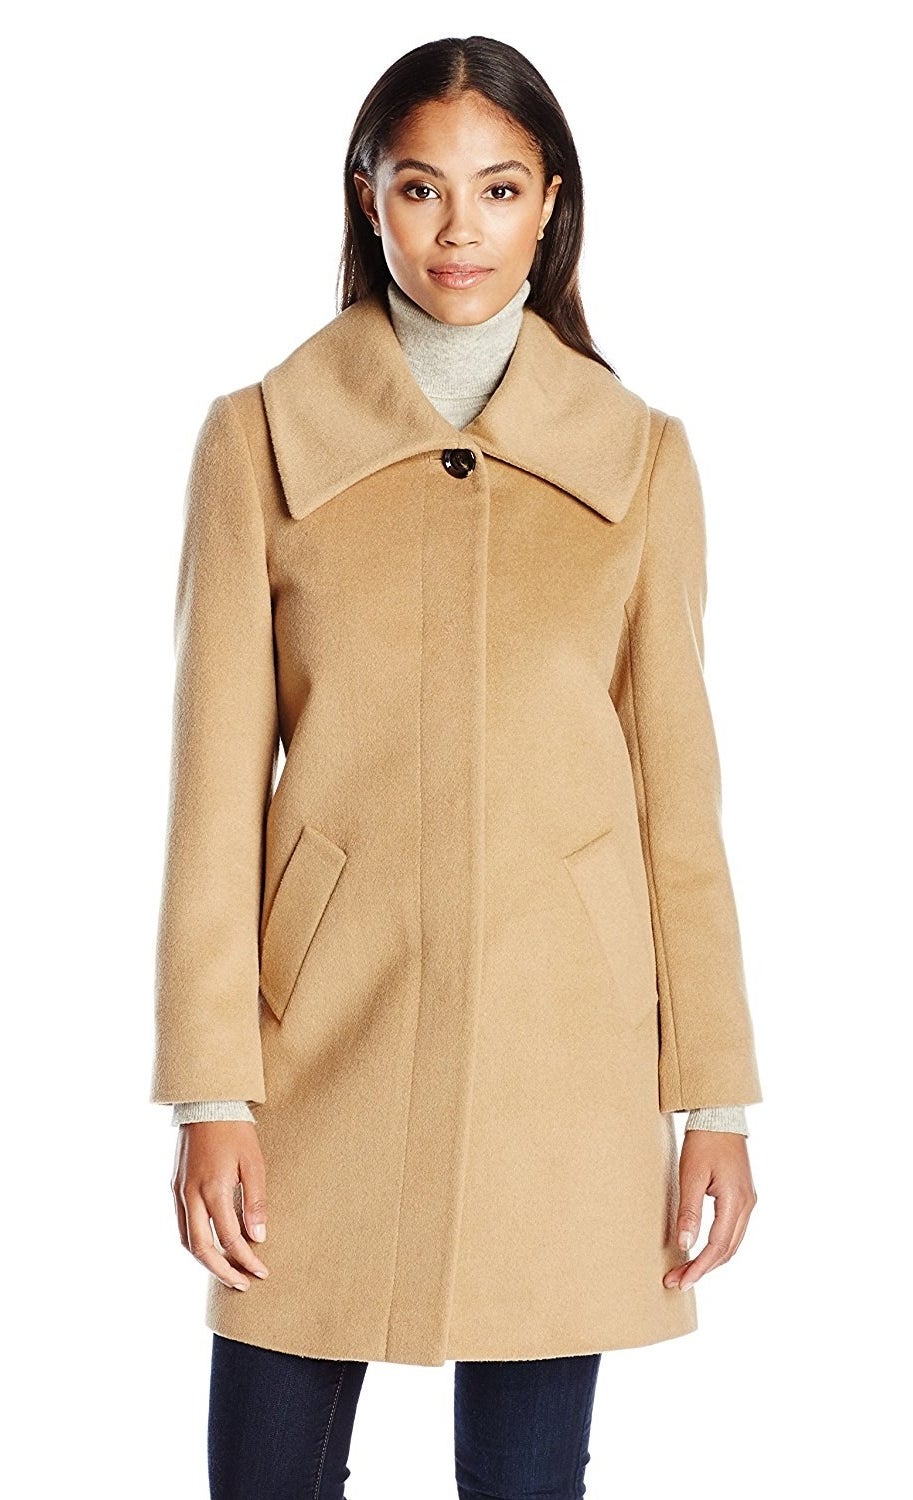 34 Coats To Keep You Warm This Winter That Won't Break The Bank